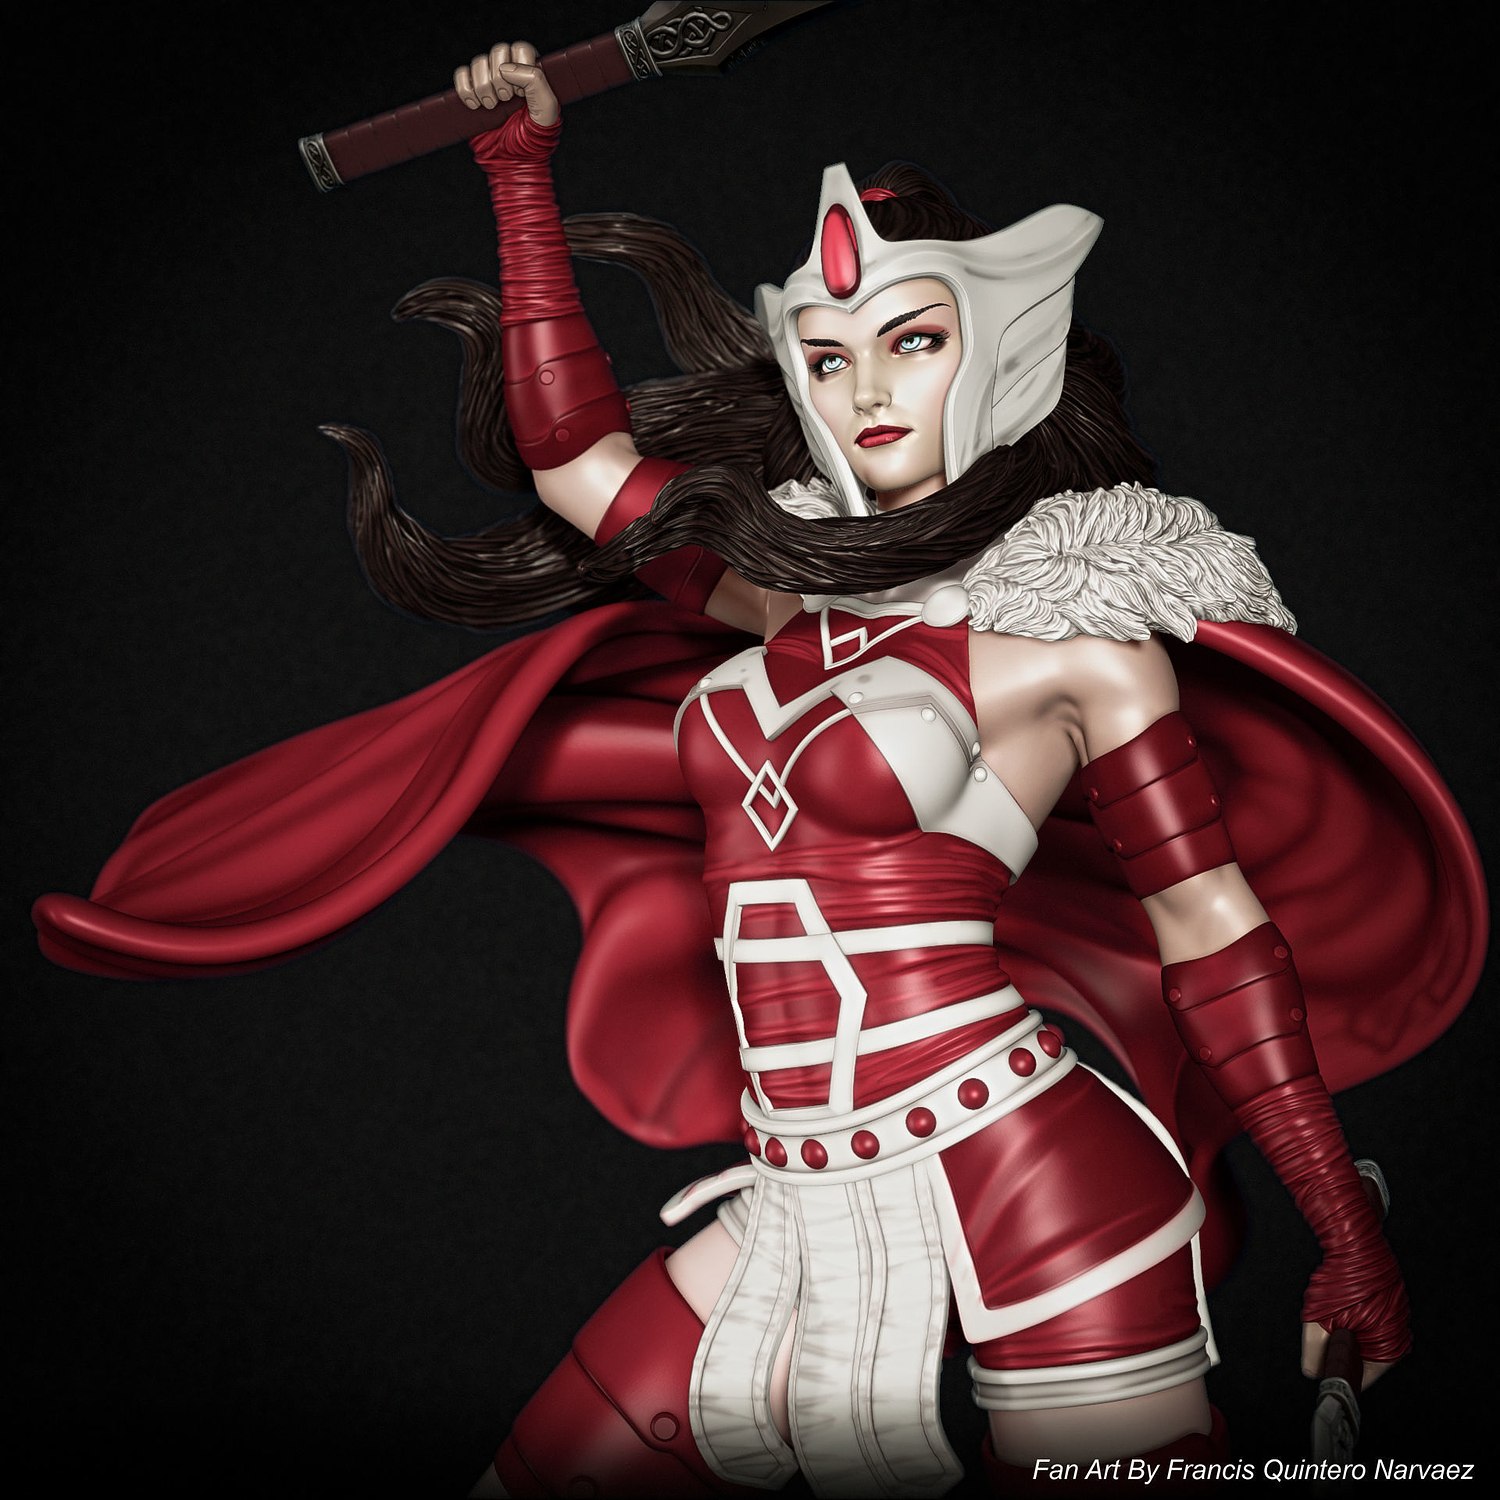 Lady Sif from Marvel